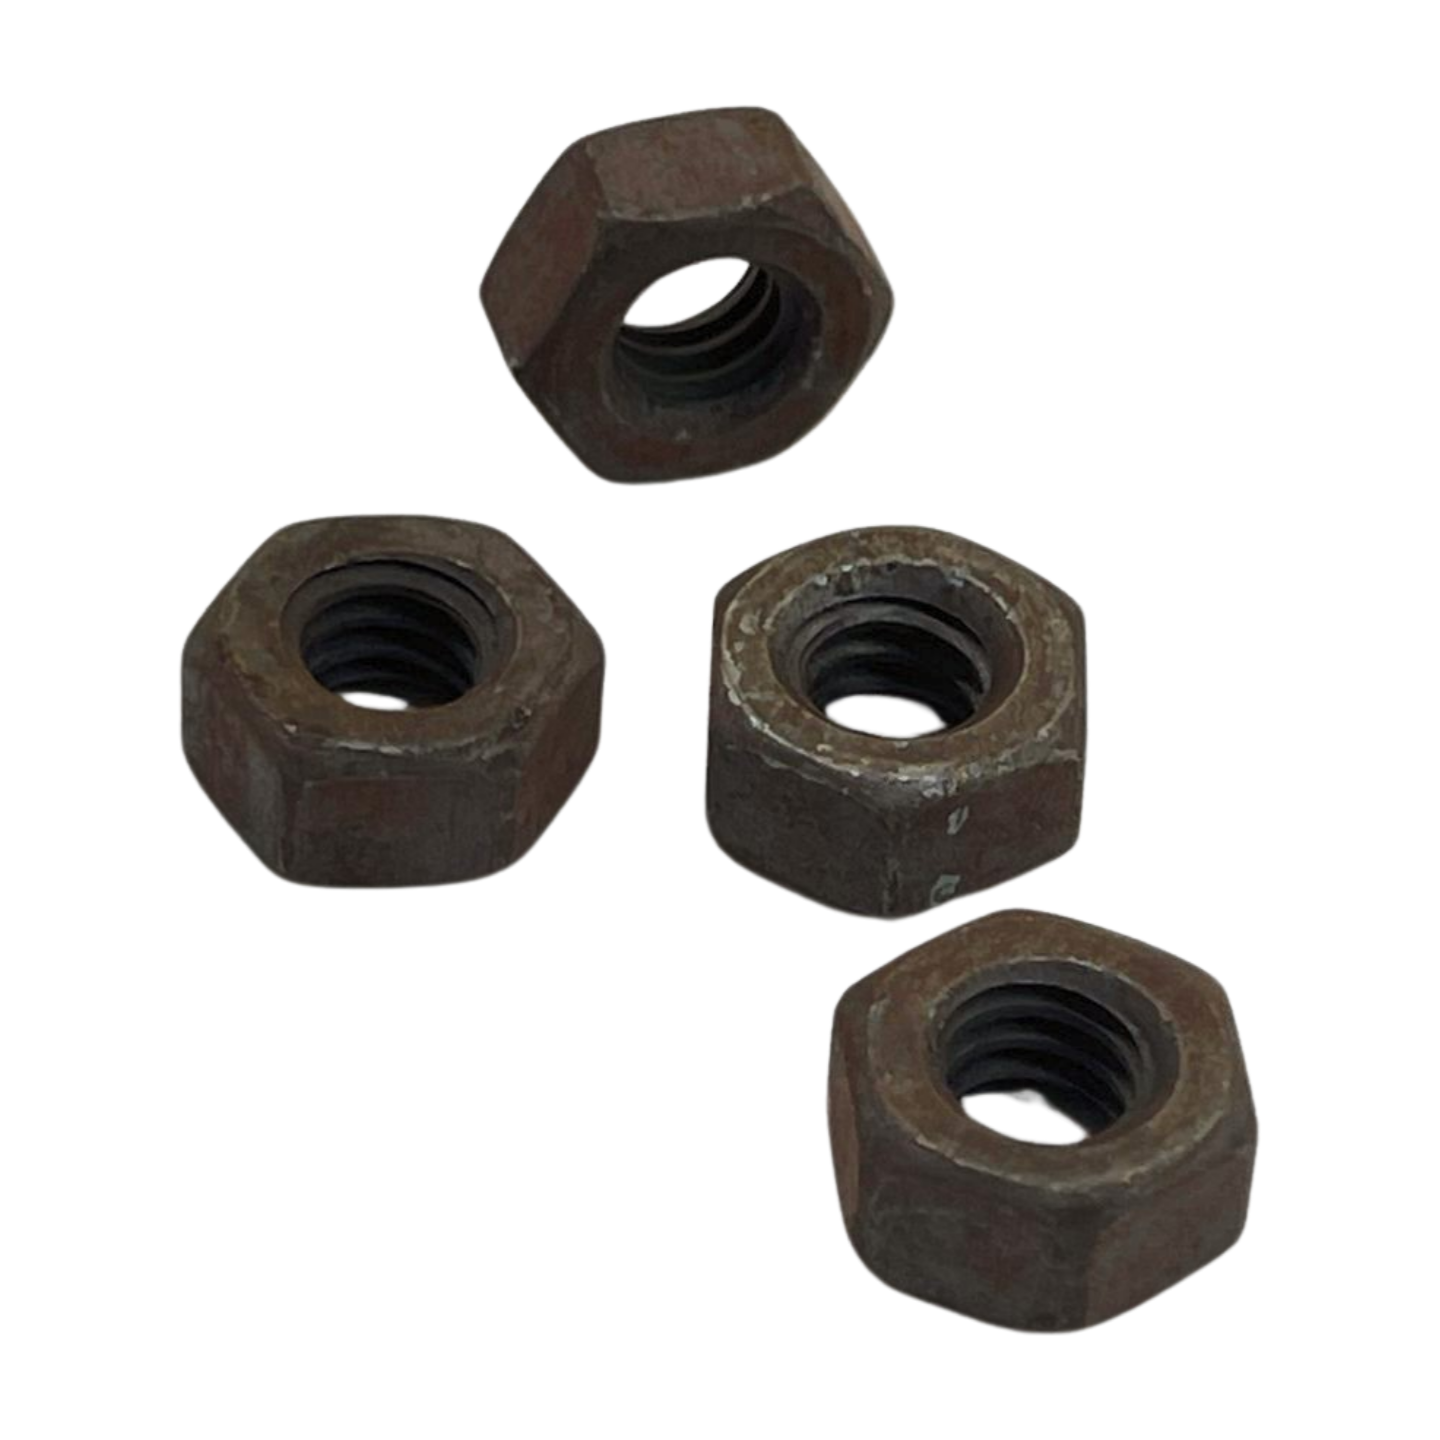 Annealed Steel Cable Hex Nuts - 100 Pack